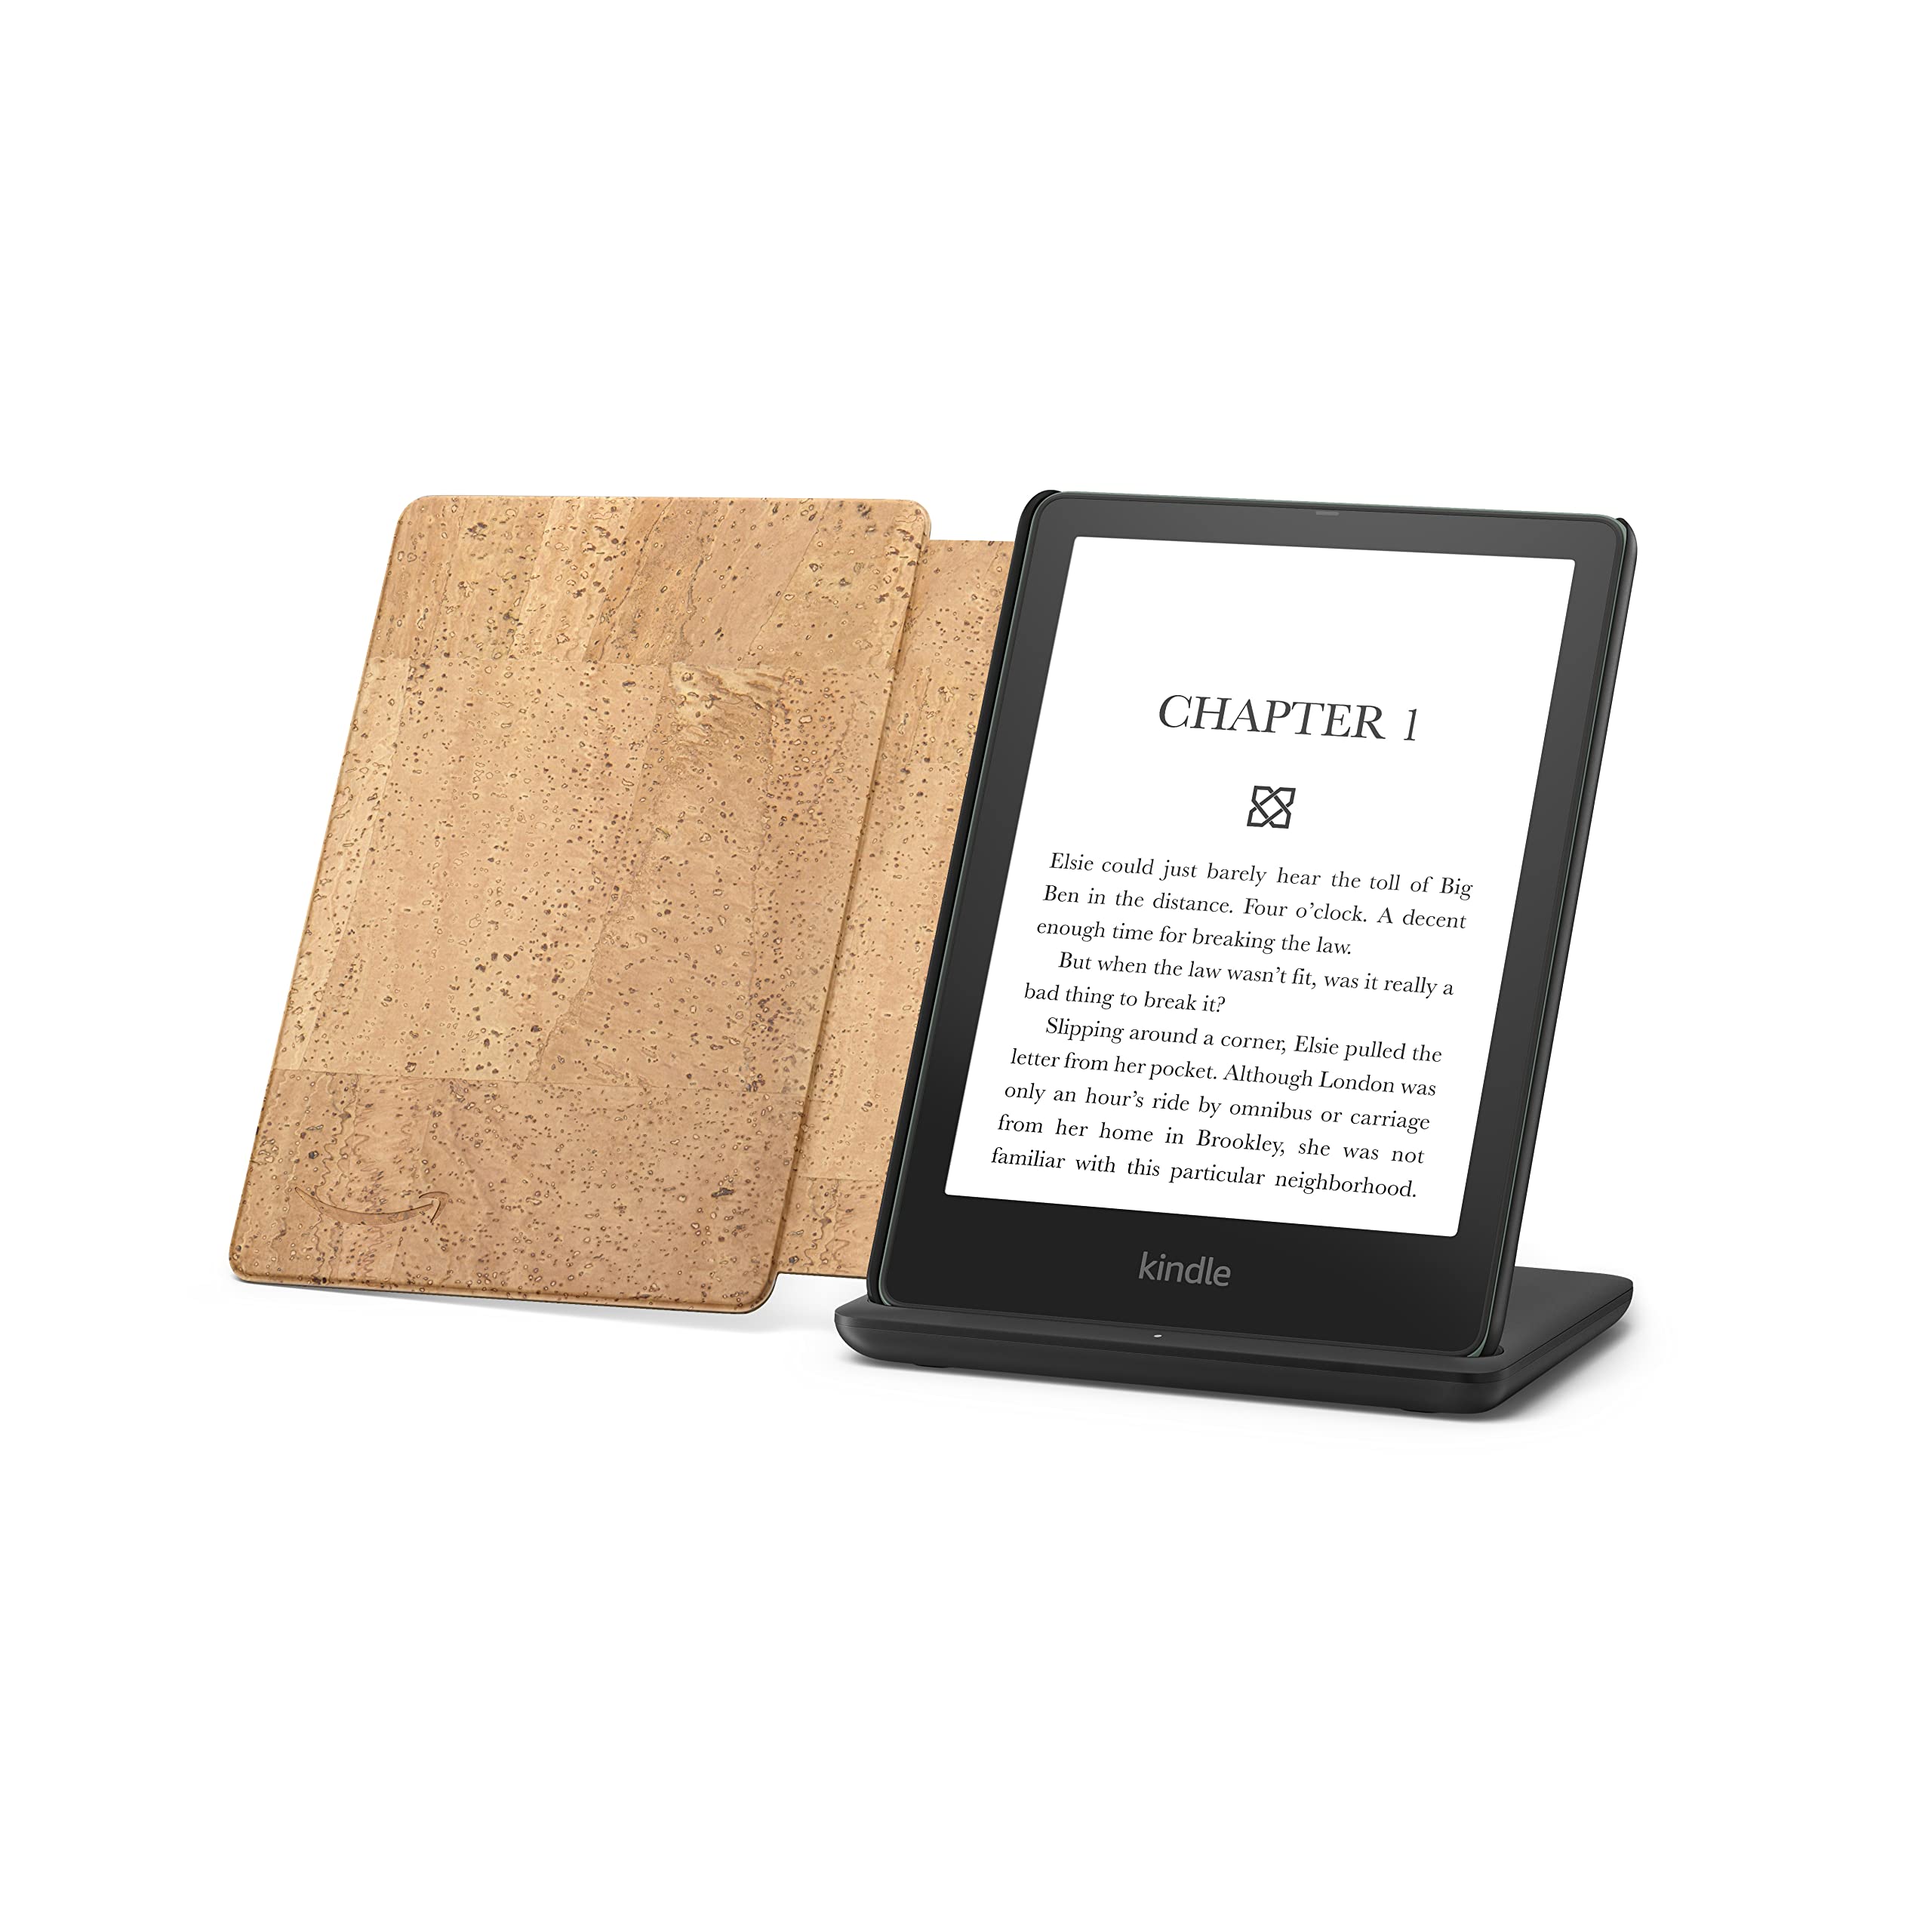 Kindle Paperwhite Signature Edition including Kindle Paperwhite (32 GB) - Agave Green - Without Lockscreen Ads, Cork Cover - Light, and Wireless Charging Dock